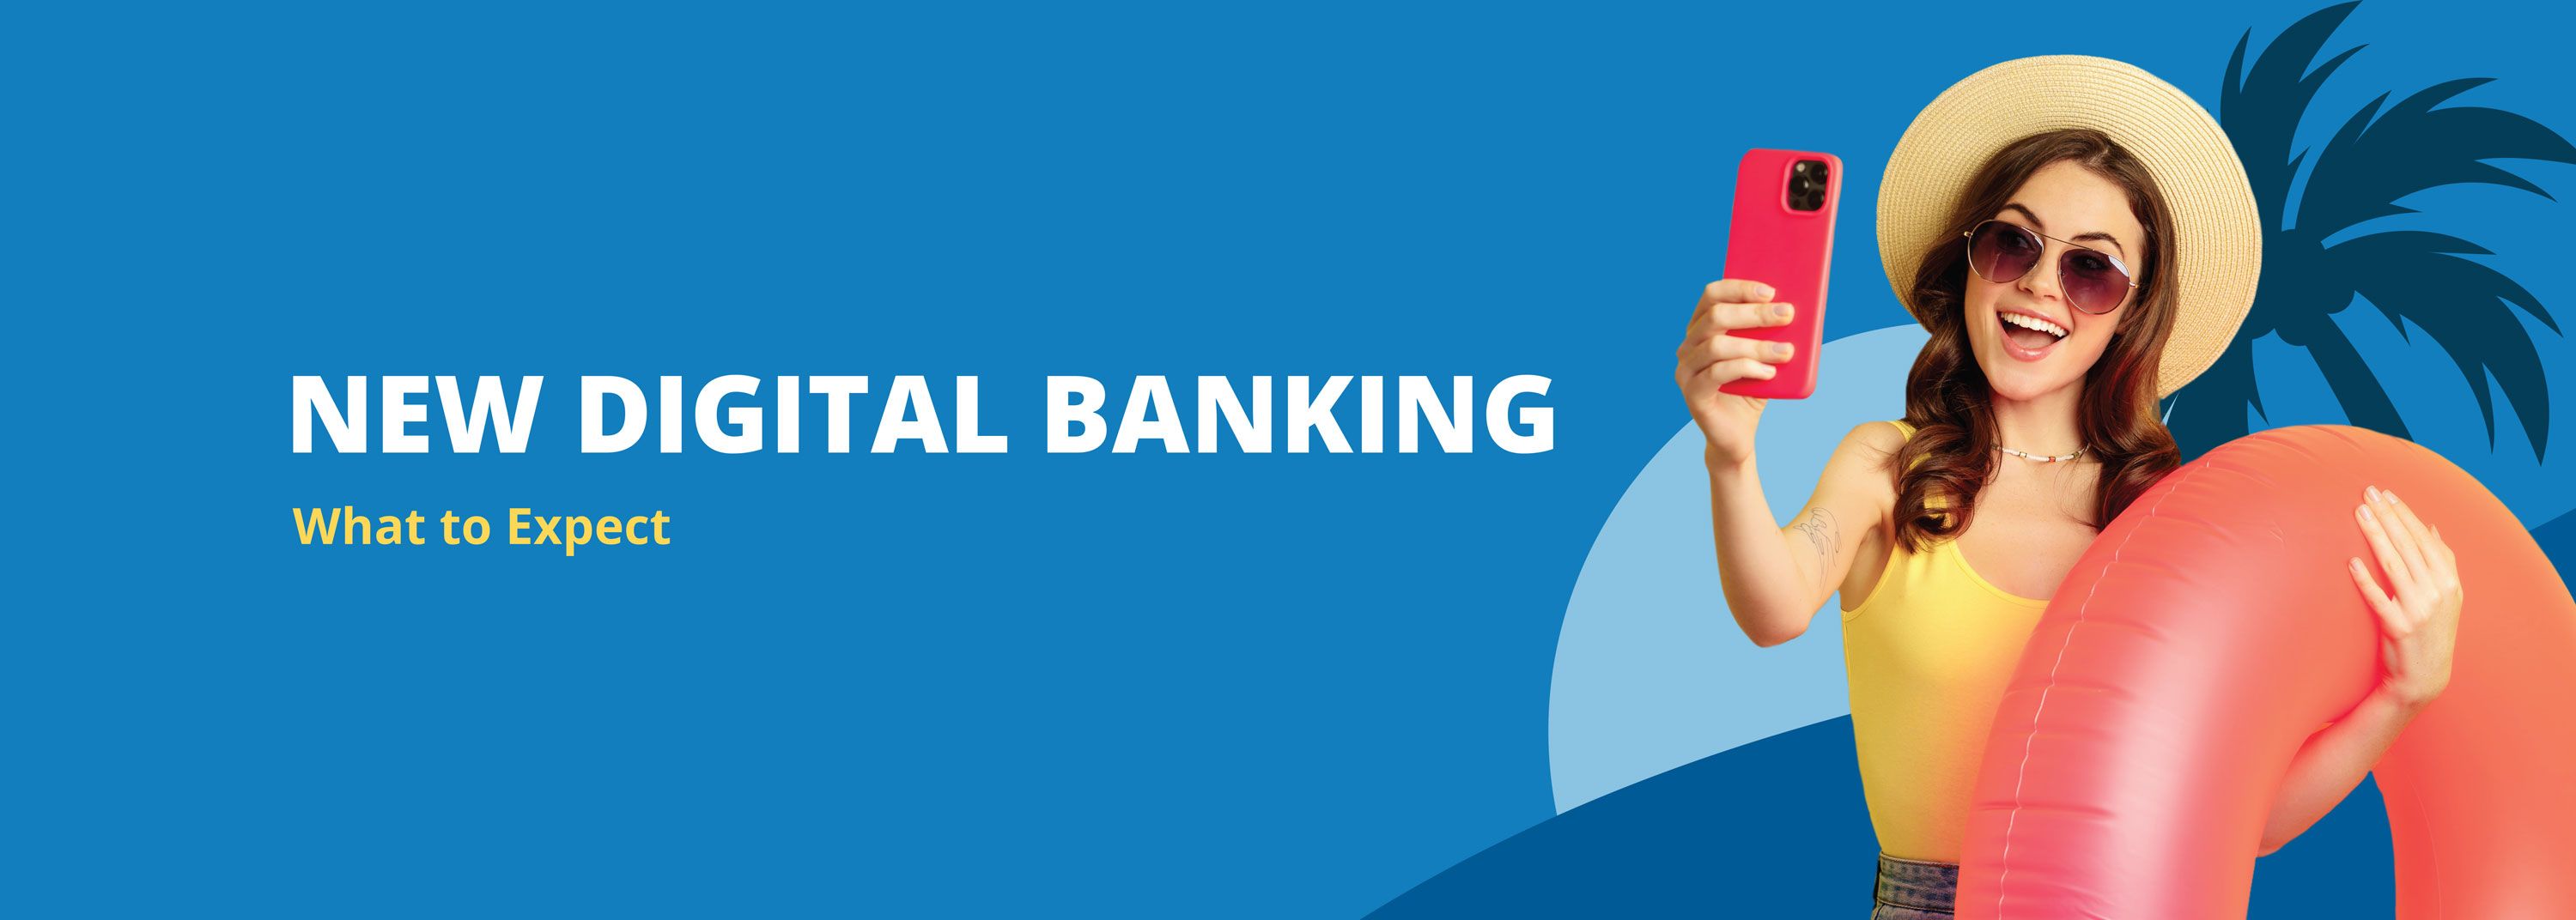 New digital banking. What to expext